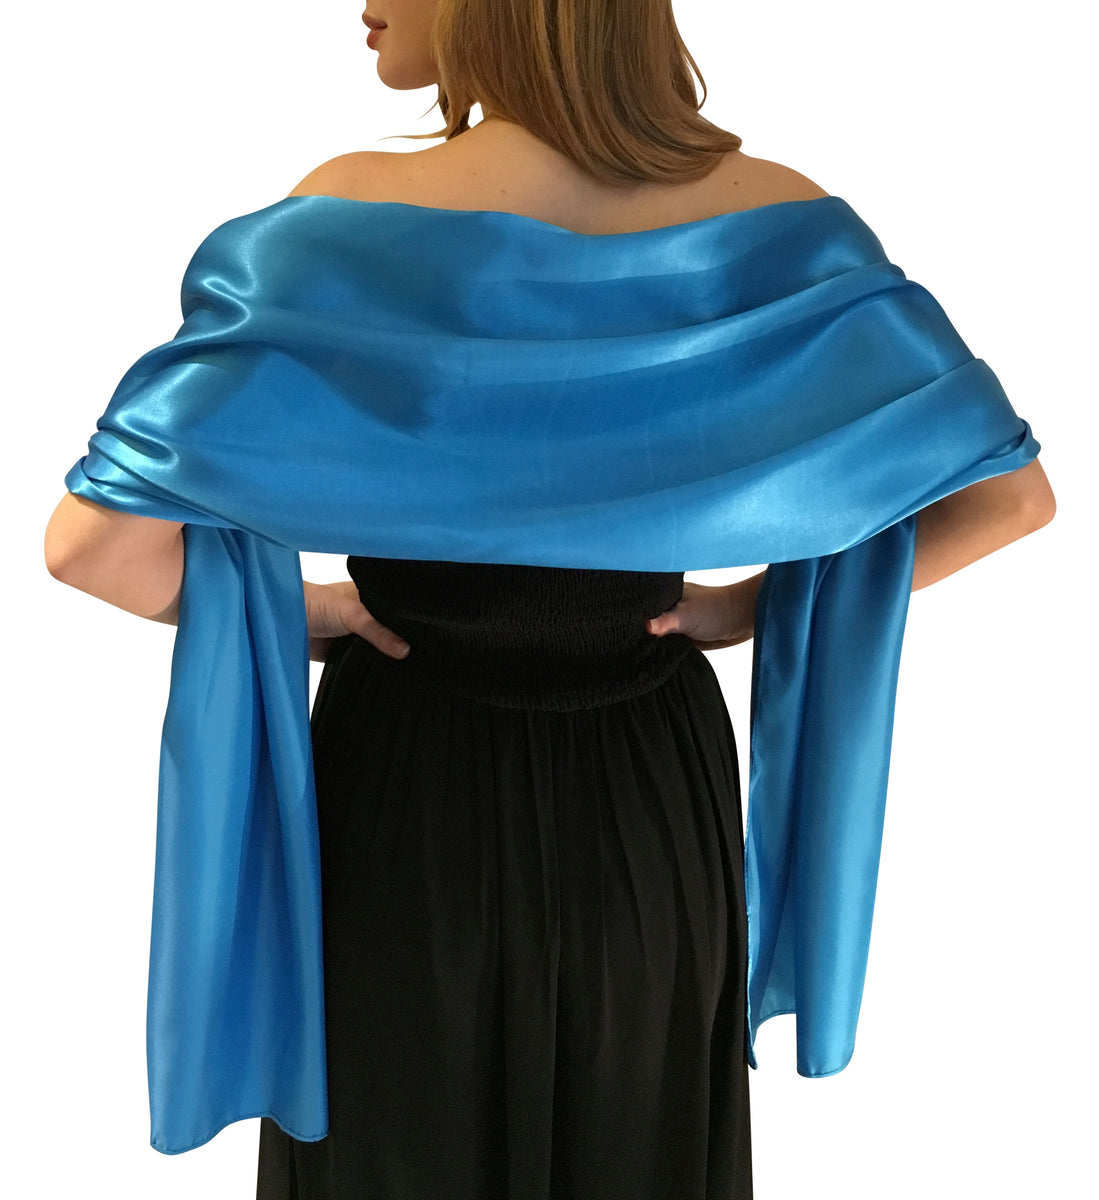 Turquoise Blue Satin Wedding Wrap – Central Chic